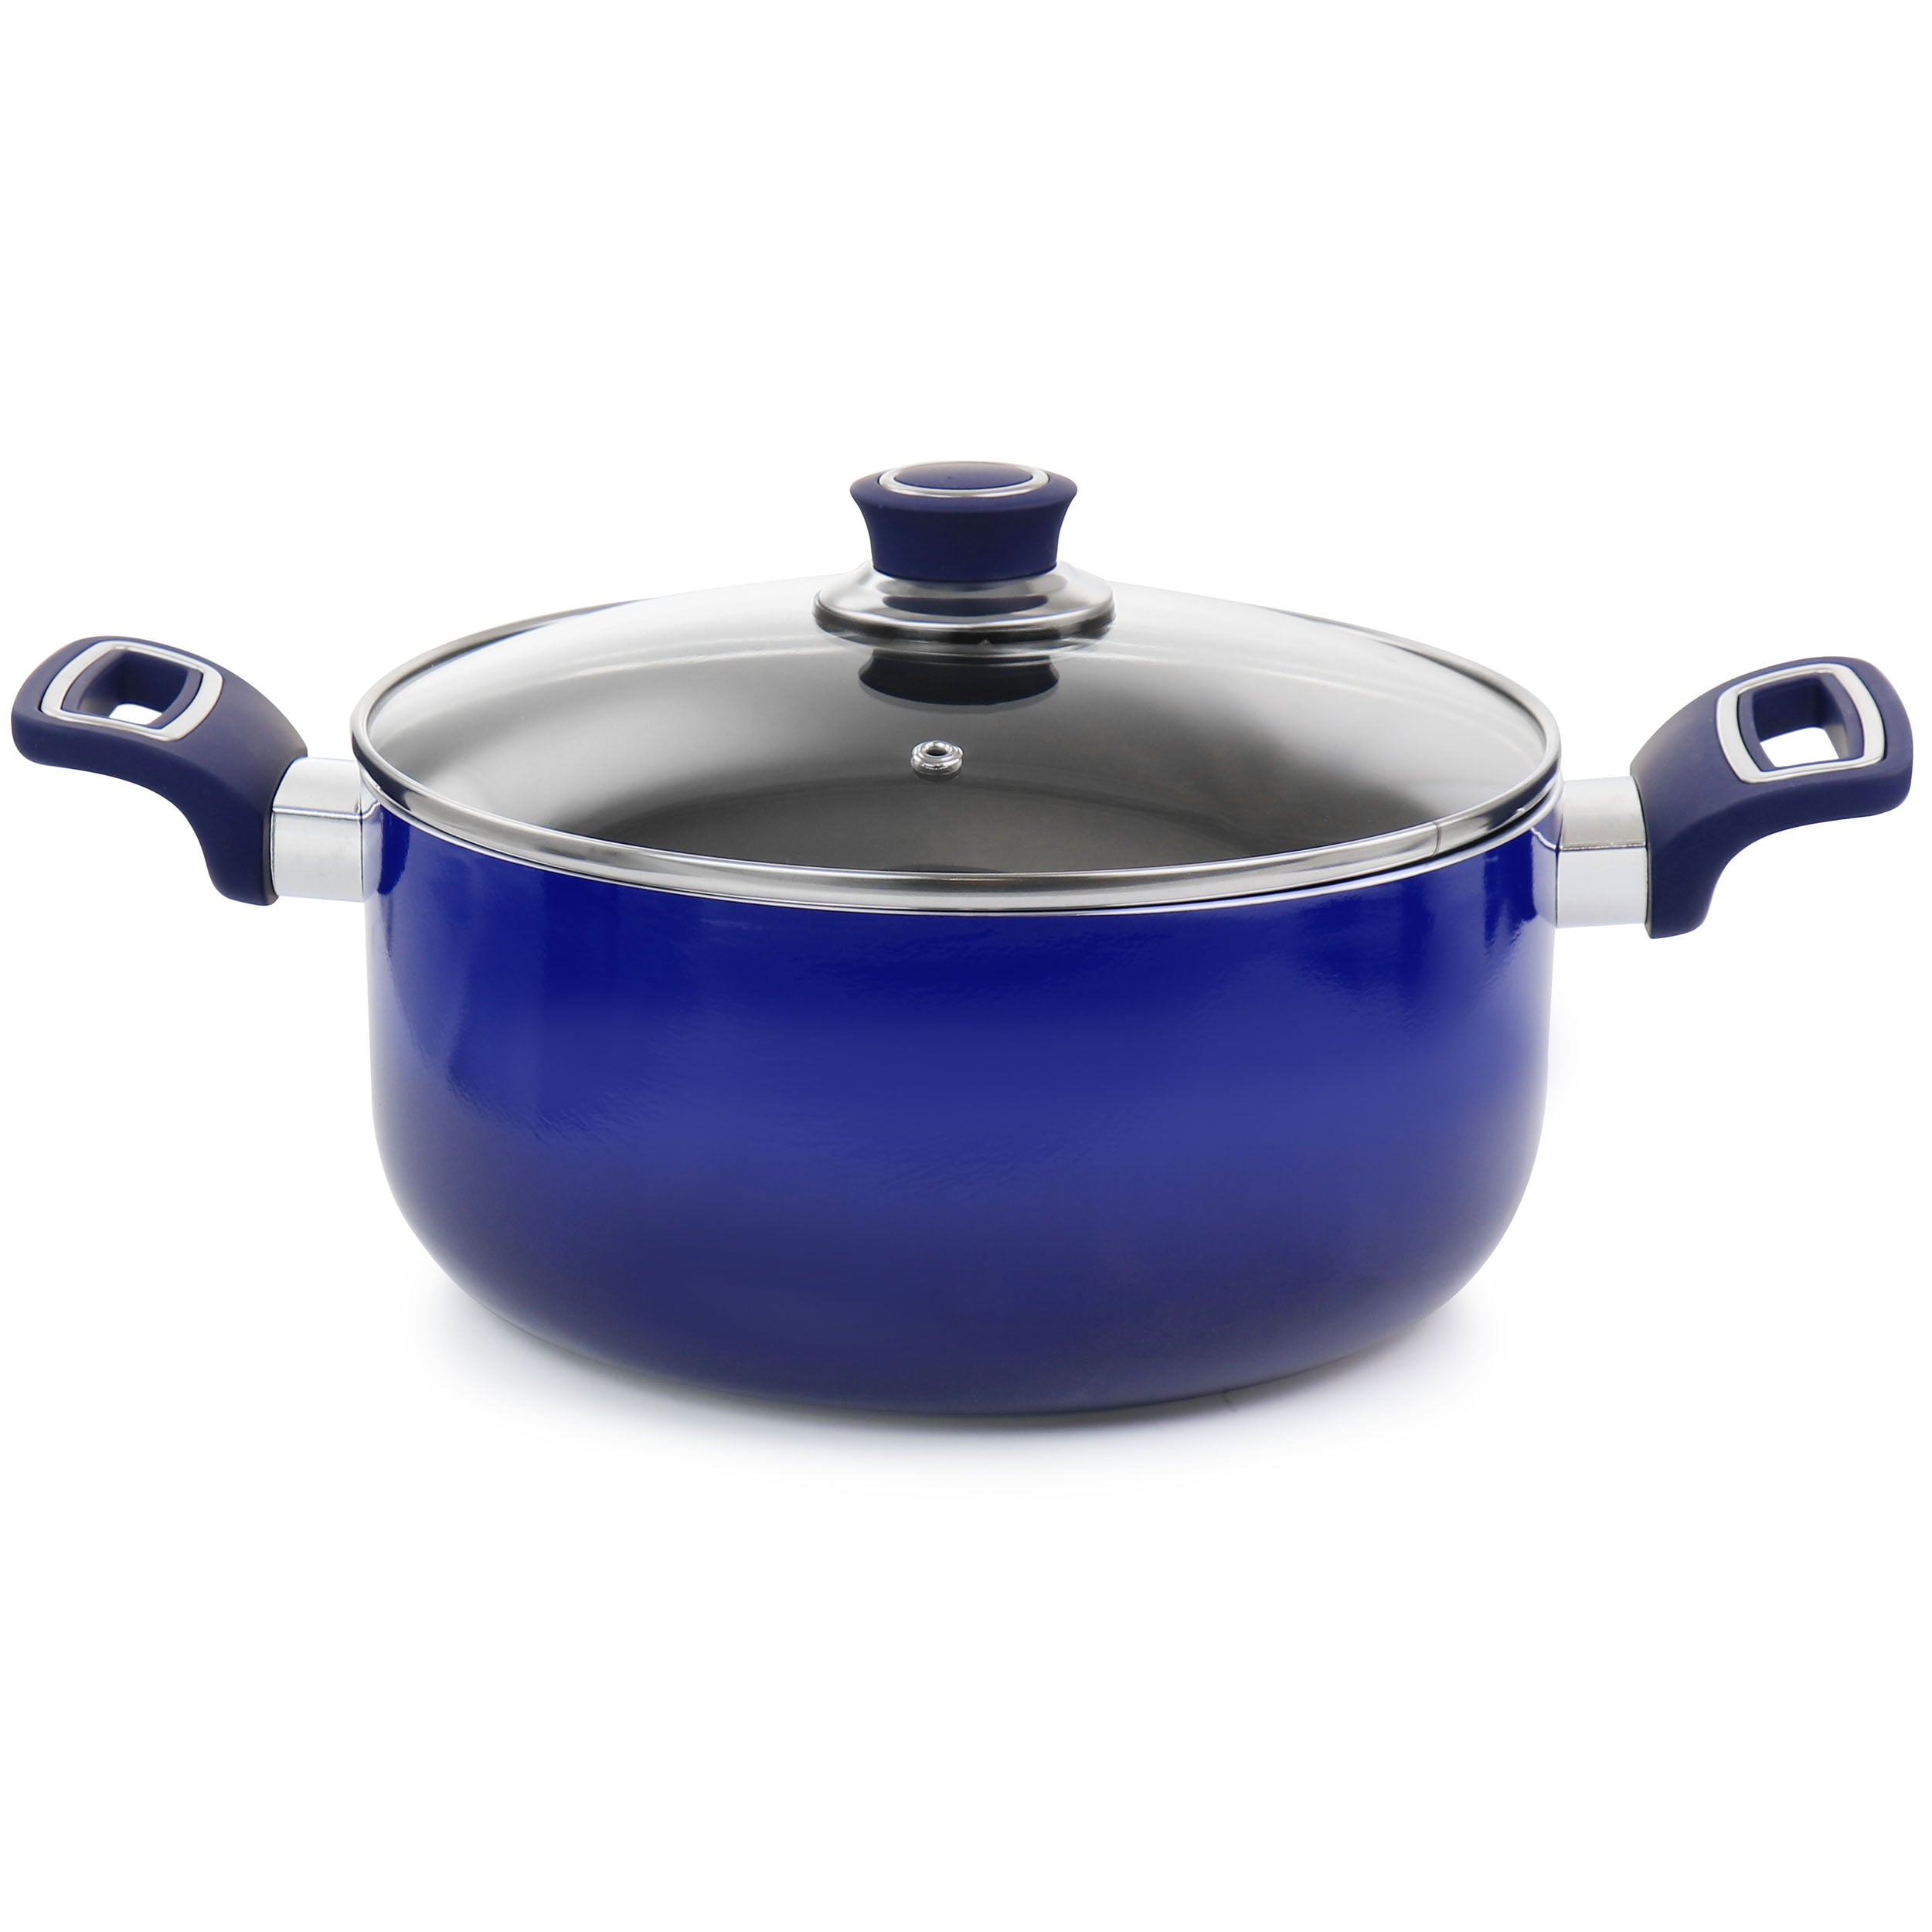 https://ak1.ostkcdn.com/images/products/is/images/direct/3134088b796dfa872097fdaef32571f3a58afdf3/Non-Stick-Aluminum-Cookware-7-Piece-Set-in-Navy.jpg